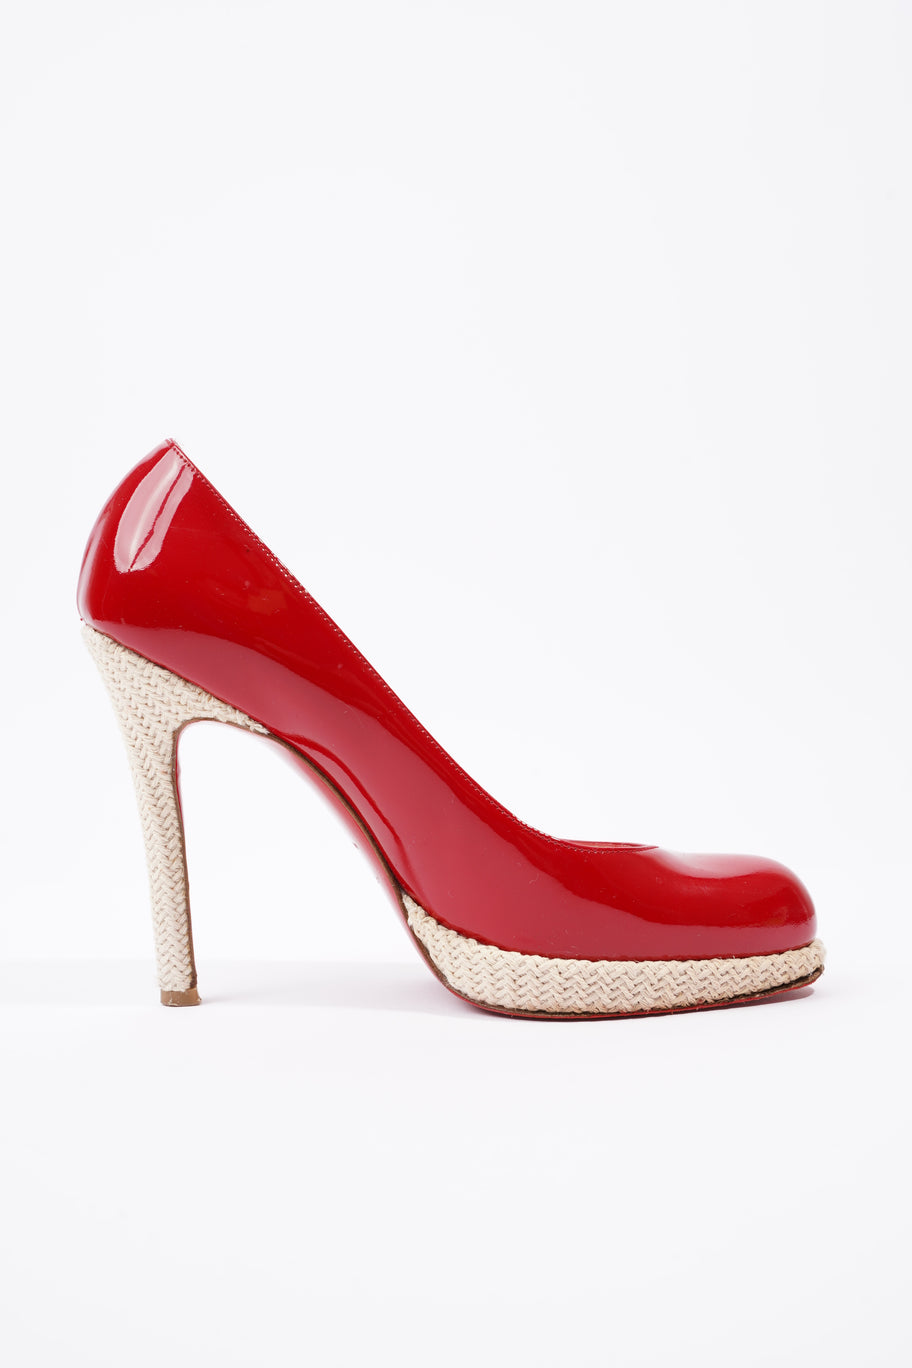 New Simple Pump 120 Red Patent Leather EU 39 UK 6 Image 4